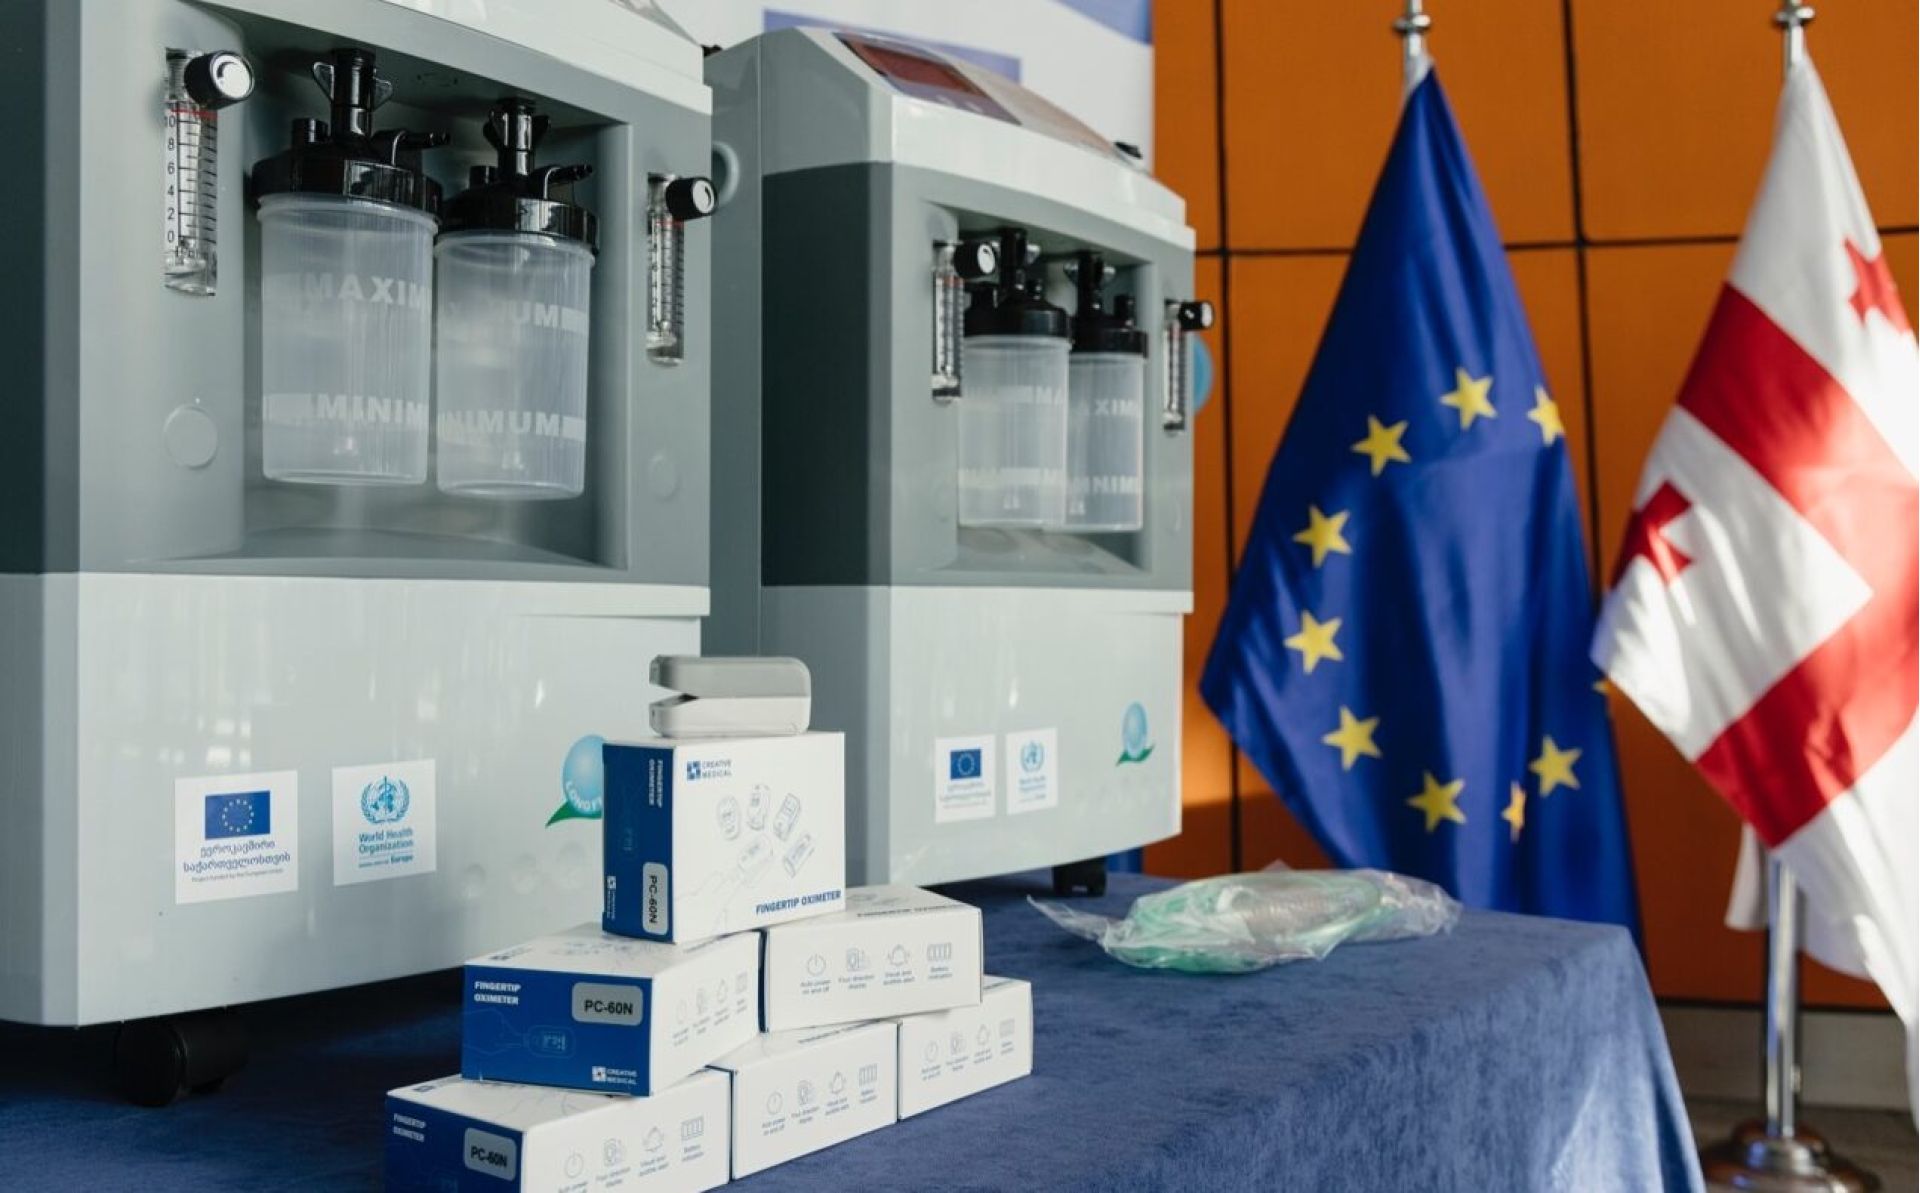 EU and WHO hand over equipment to help medical facilities fight COVID-19